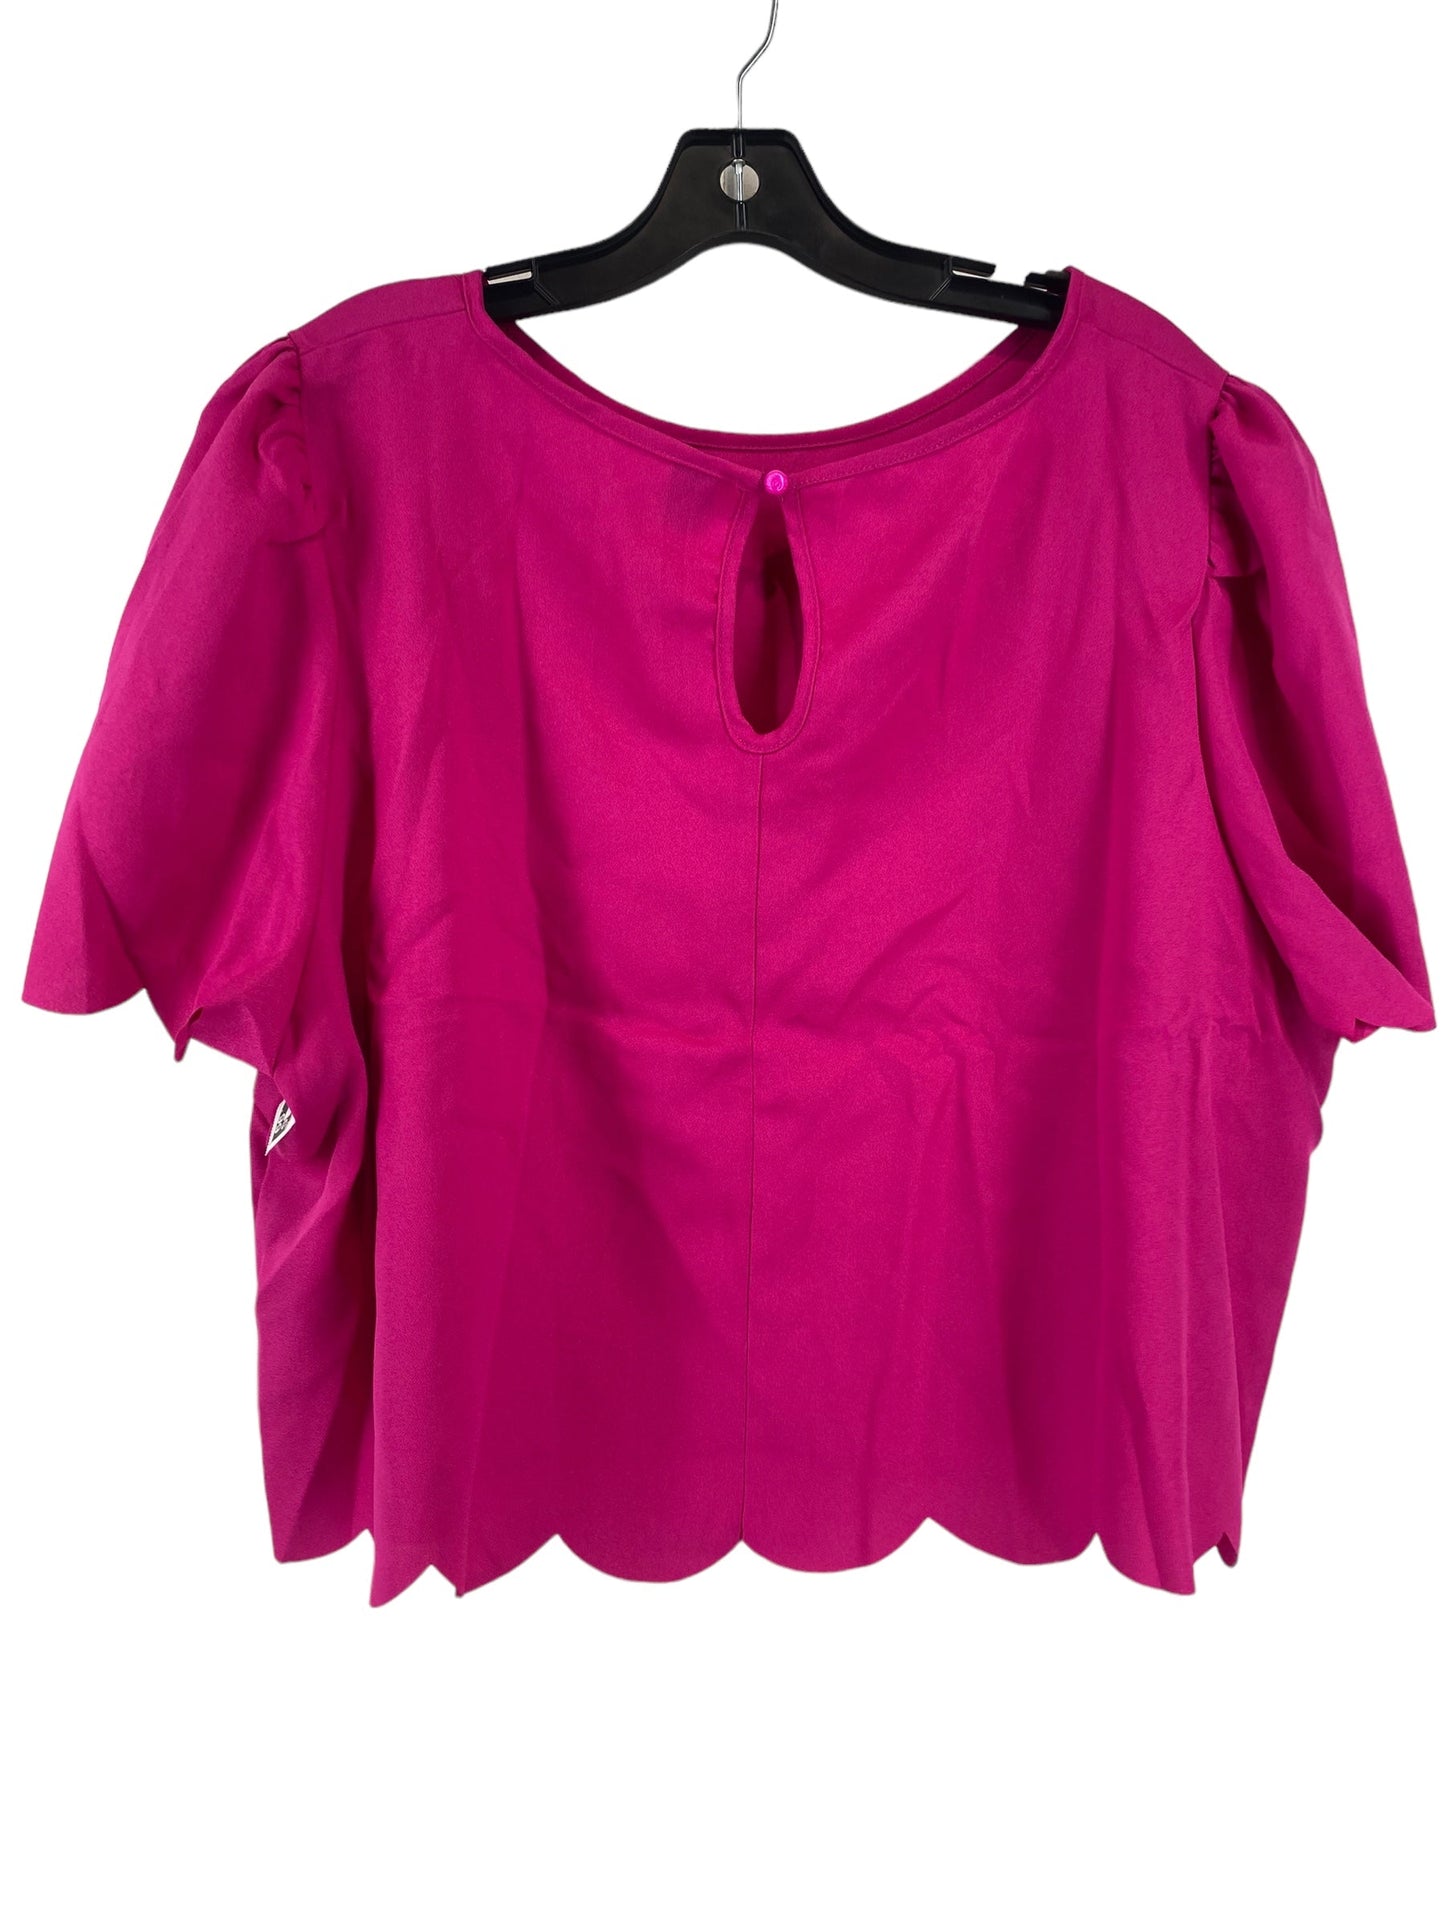 Pink Top Short Sleeve Shein, Size 4x